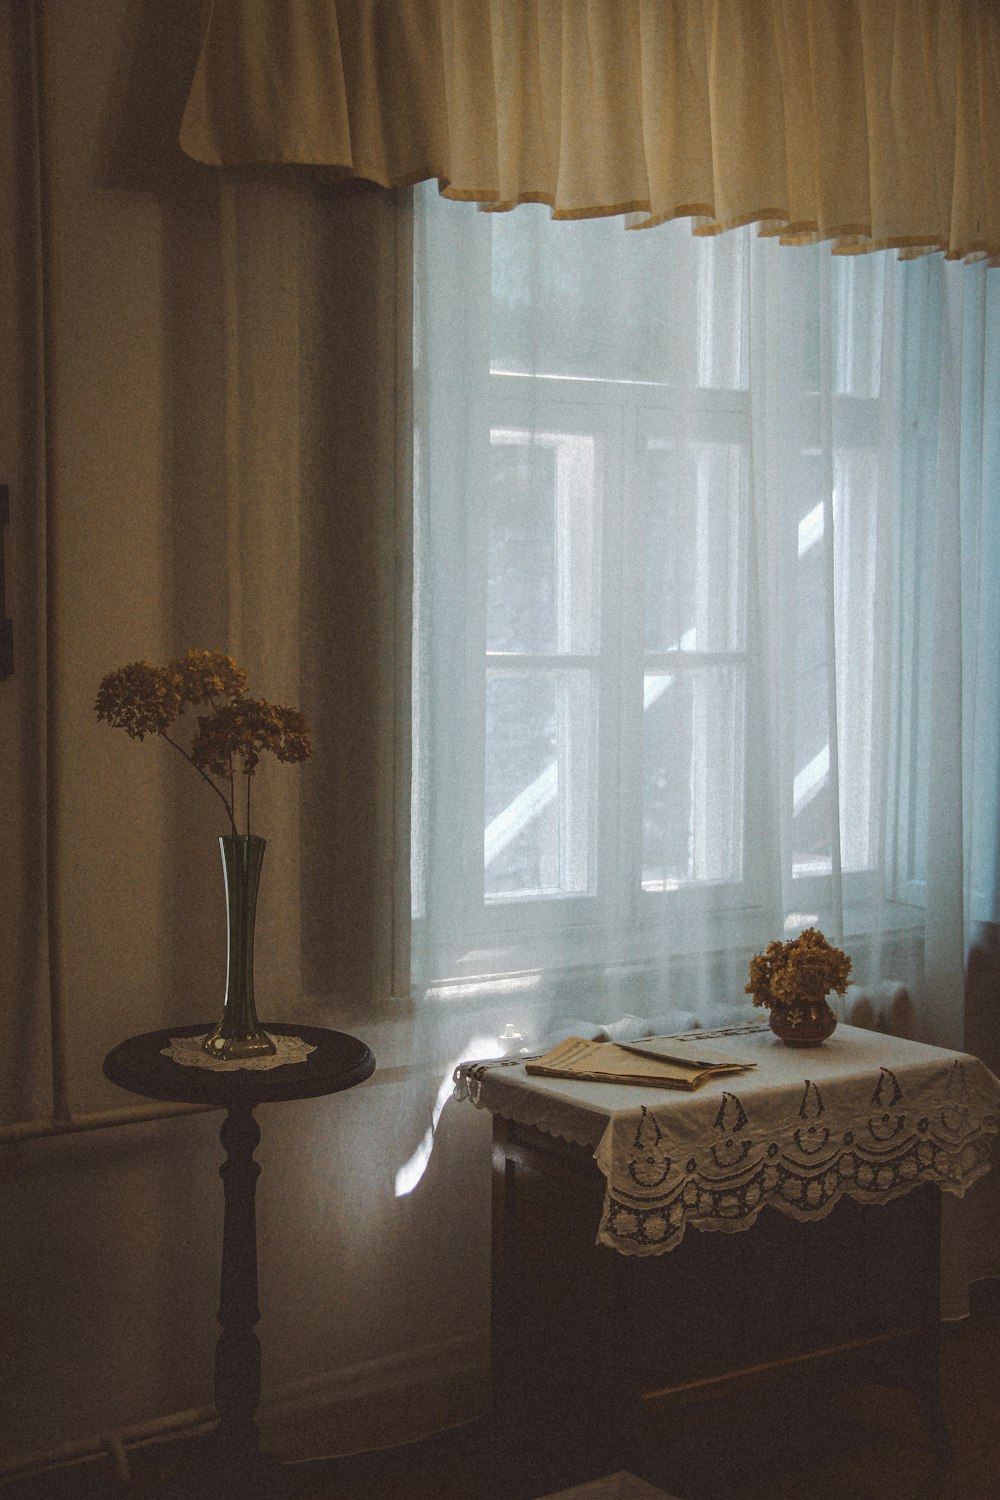 a table with a vase of flowers on it next to a window